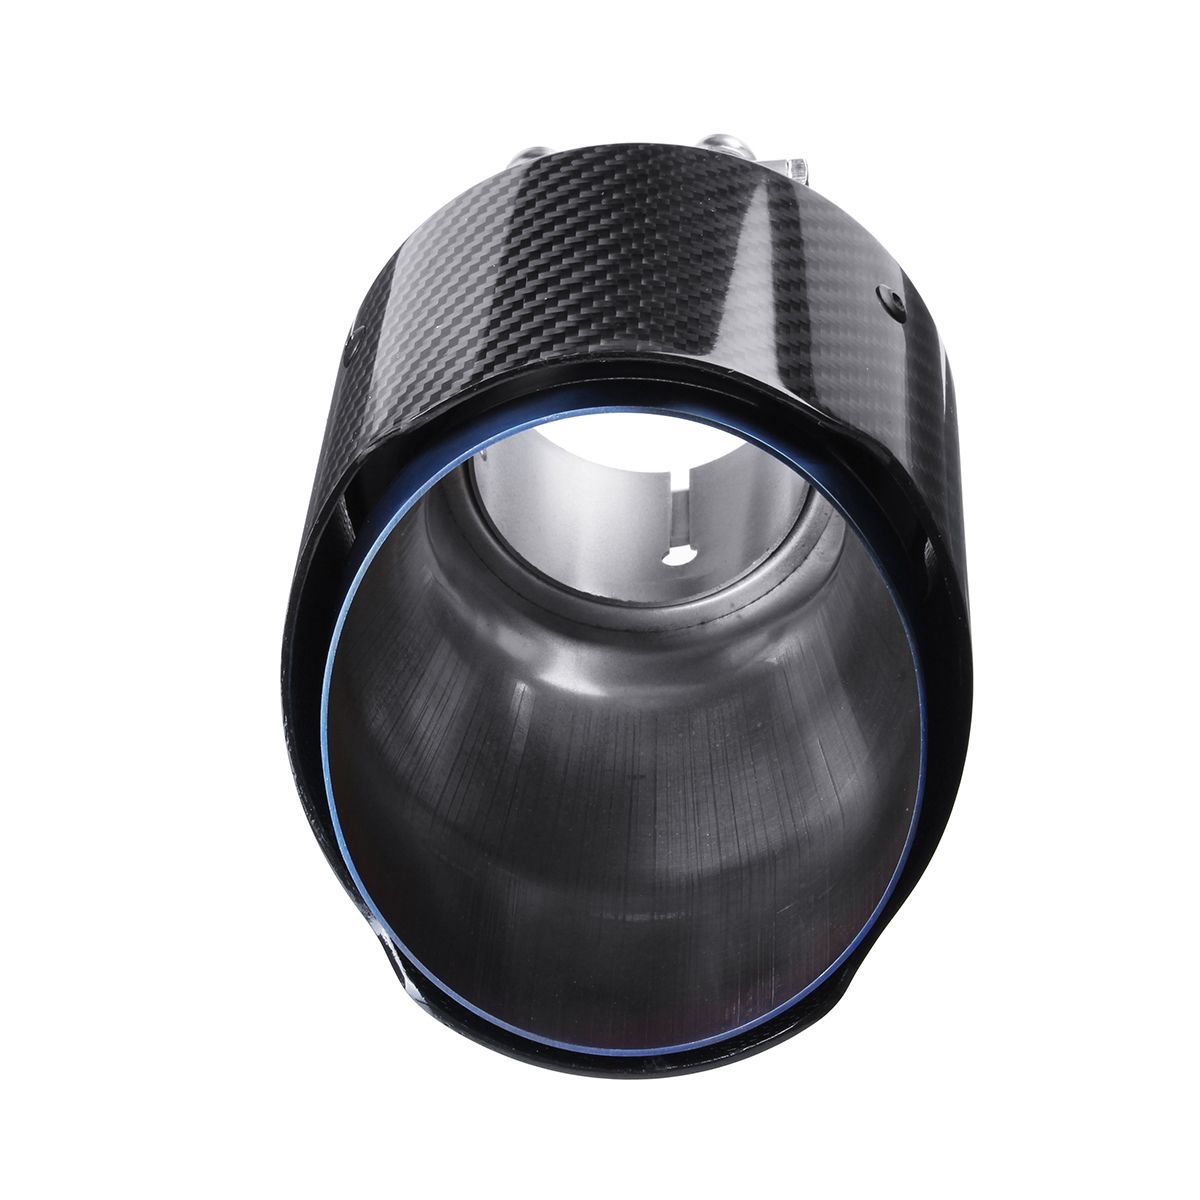 63MM-Inlet-114MM-Outlet-Car-Carbon-Fiber-Stainless-Steel-Car-Rear-Exhaust-Tip-Pipe-Muffler-Adapter-R-1681964